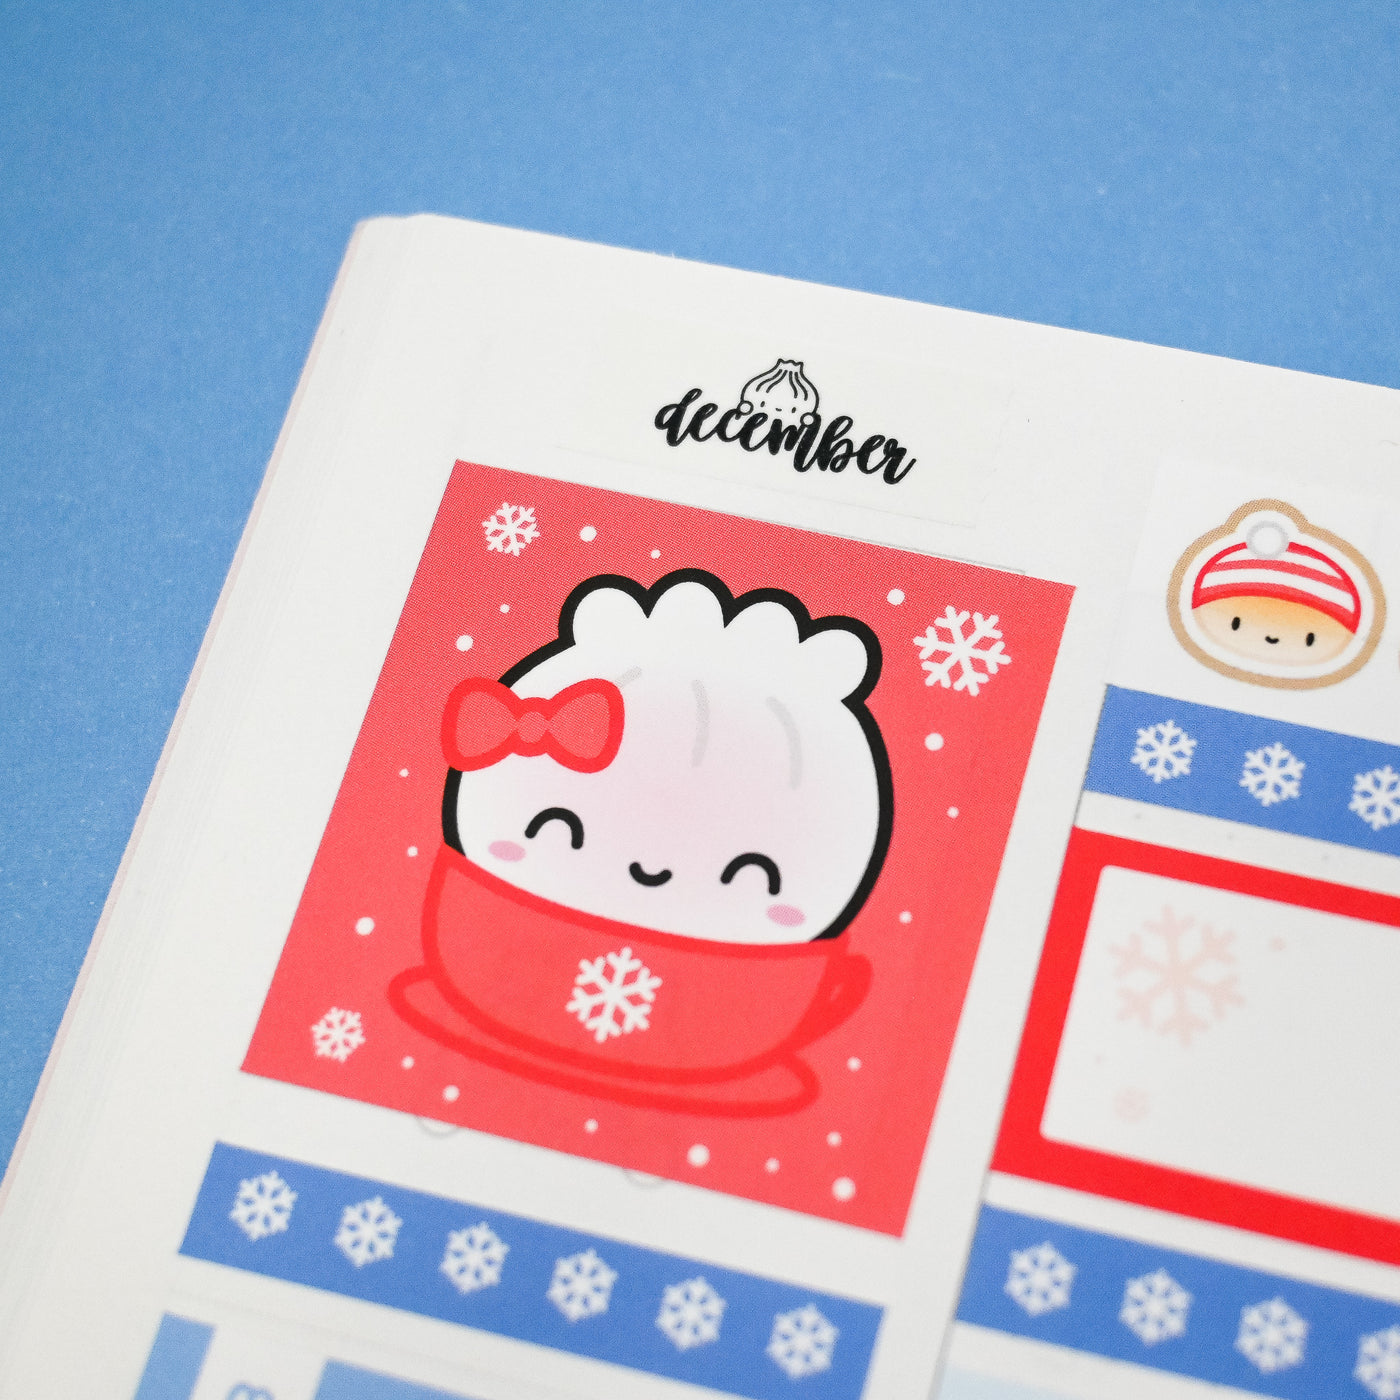 SK047 | Hot Cocoa Weekly Sticker Kit (Standard Vertical)